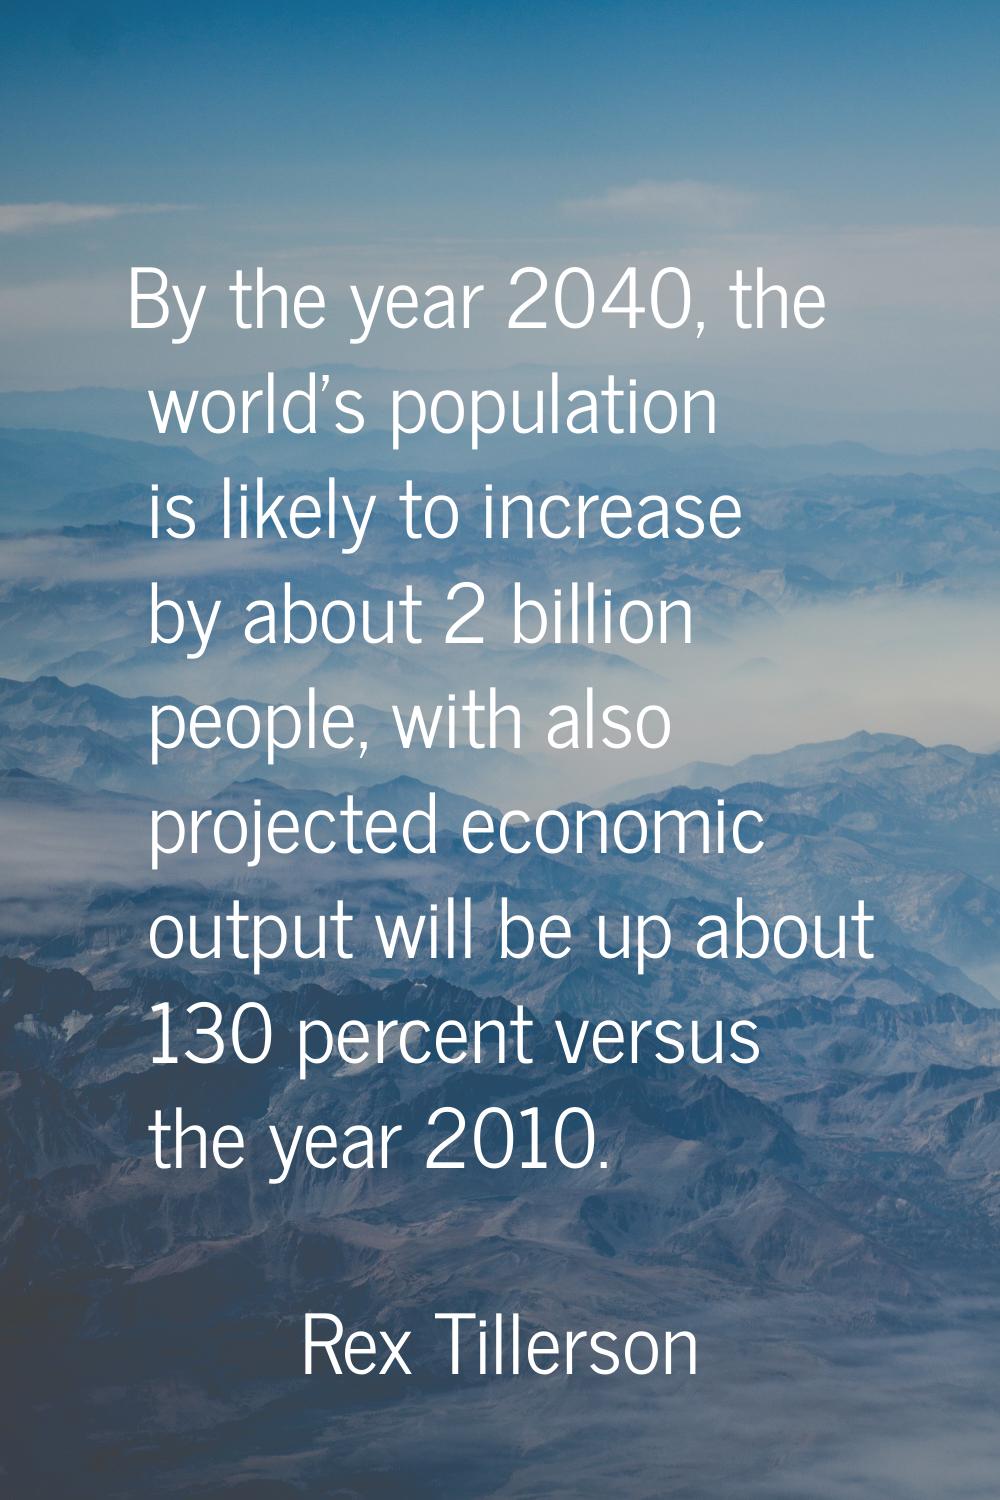 By the year 2040, the world's population is likely to increase by about 2 billion people, with also